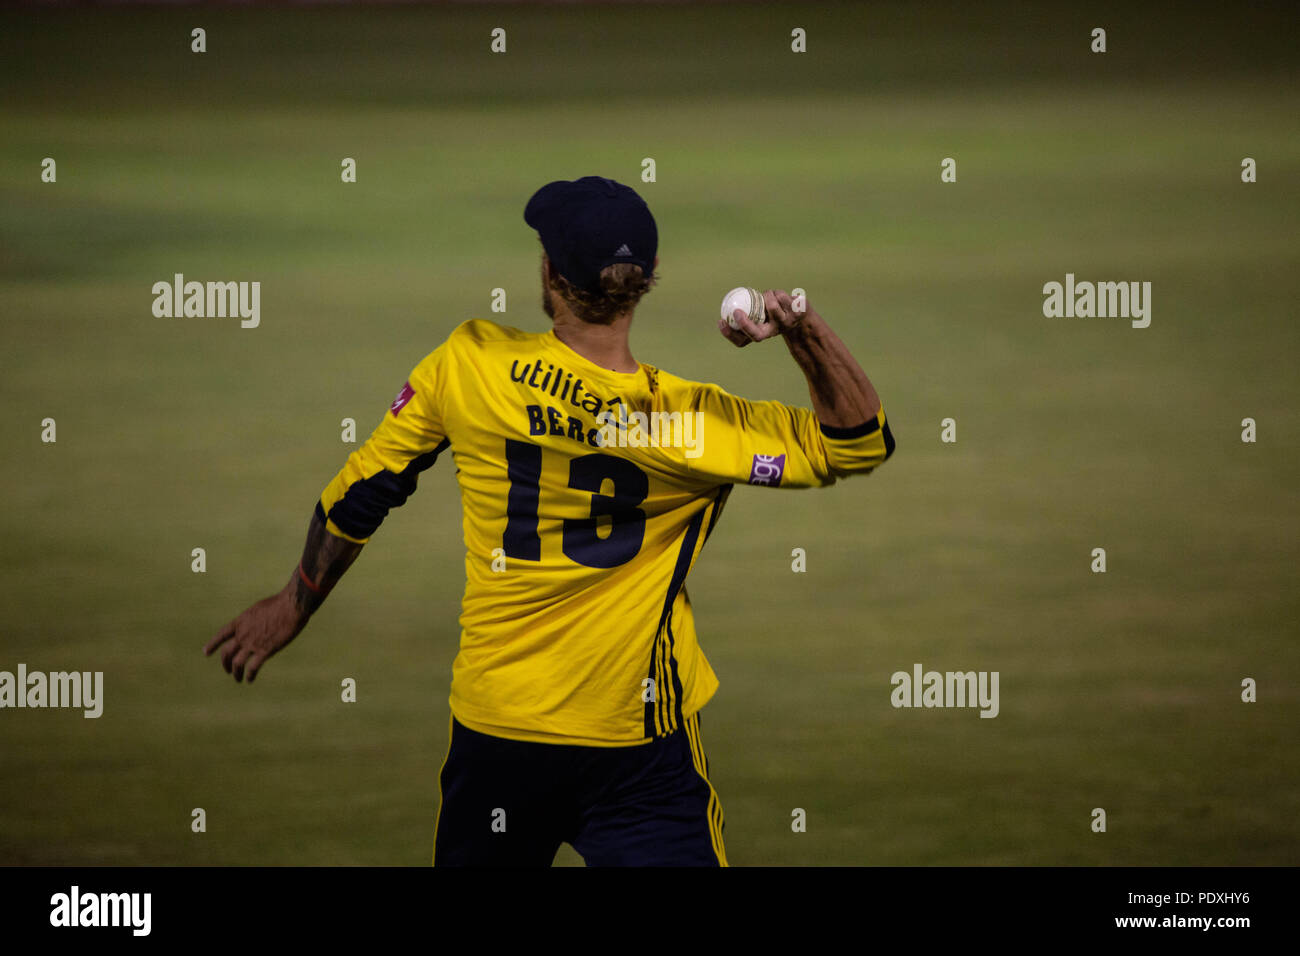 Sophia Gardens, Cardiff, Wales, United Kingdom. Glamorgan hosted Hampshire for a crunch game in the Vitality Blast 20/20 Cricket South Group Stage on 10 August 2018 at Sophia Gardens in Cardiff. Pictured: GK Berg of Hamphire in action. Credit: Rob Watkins/Alamy Live News Stock Photo